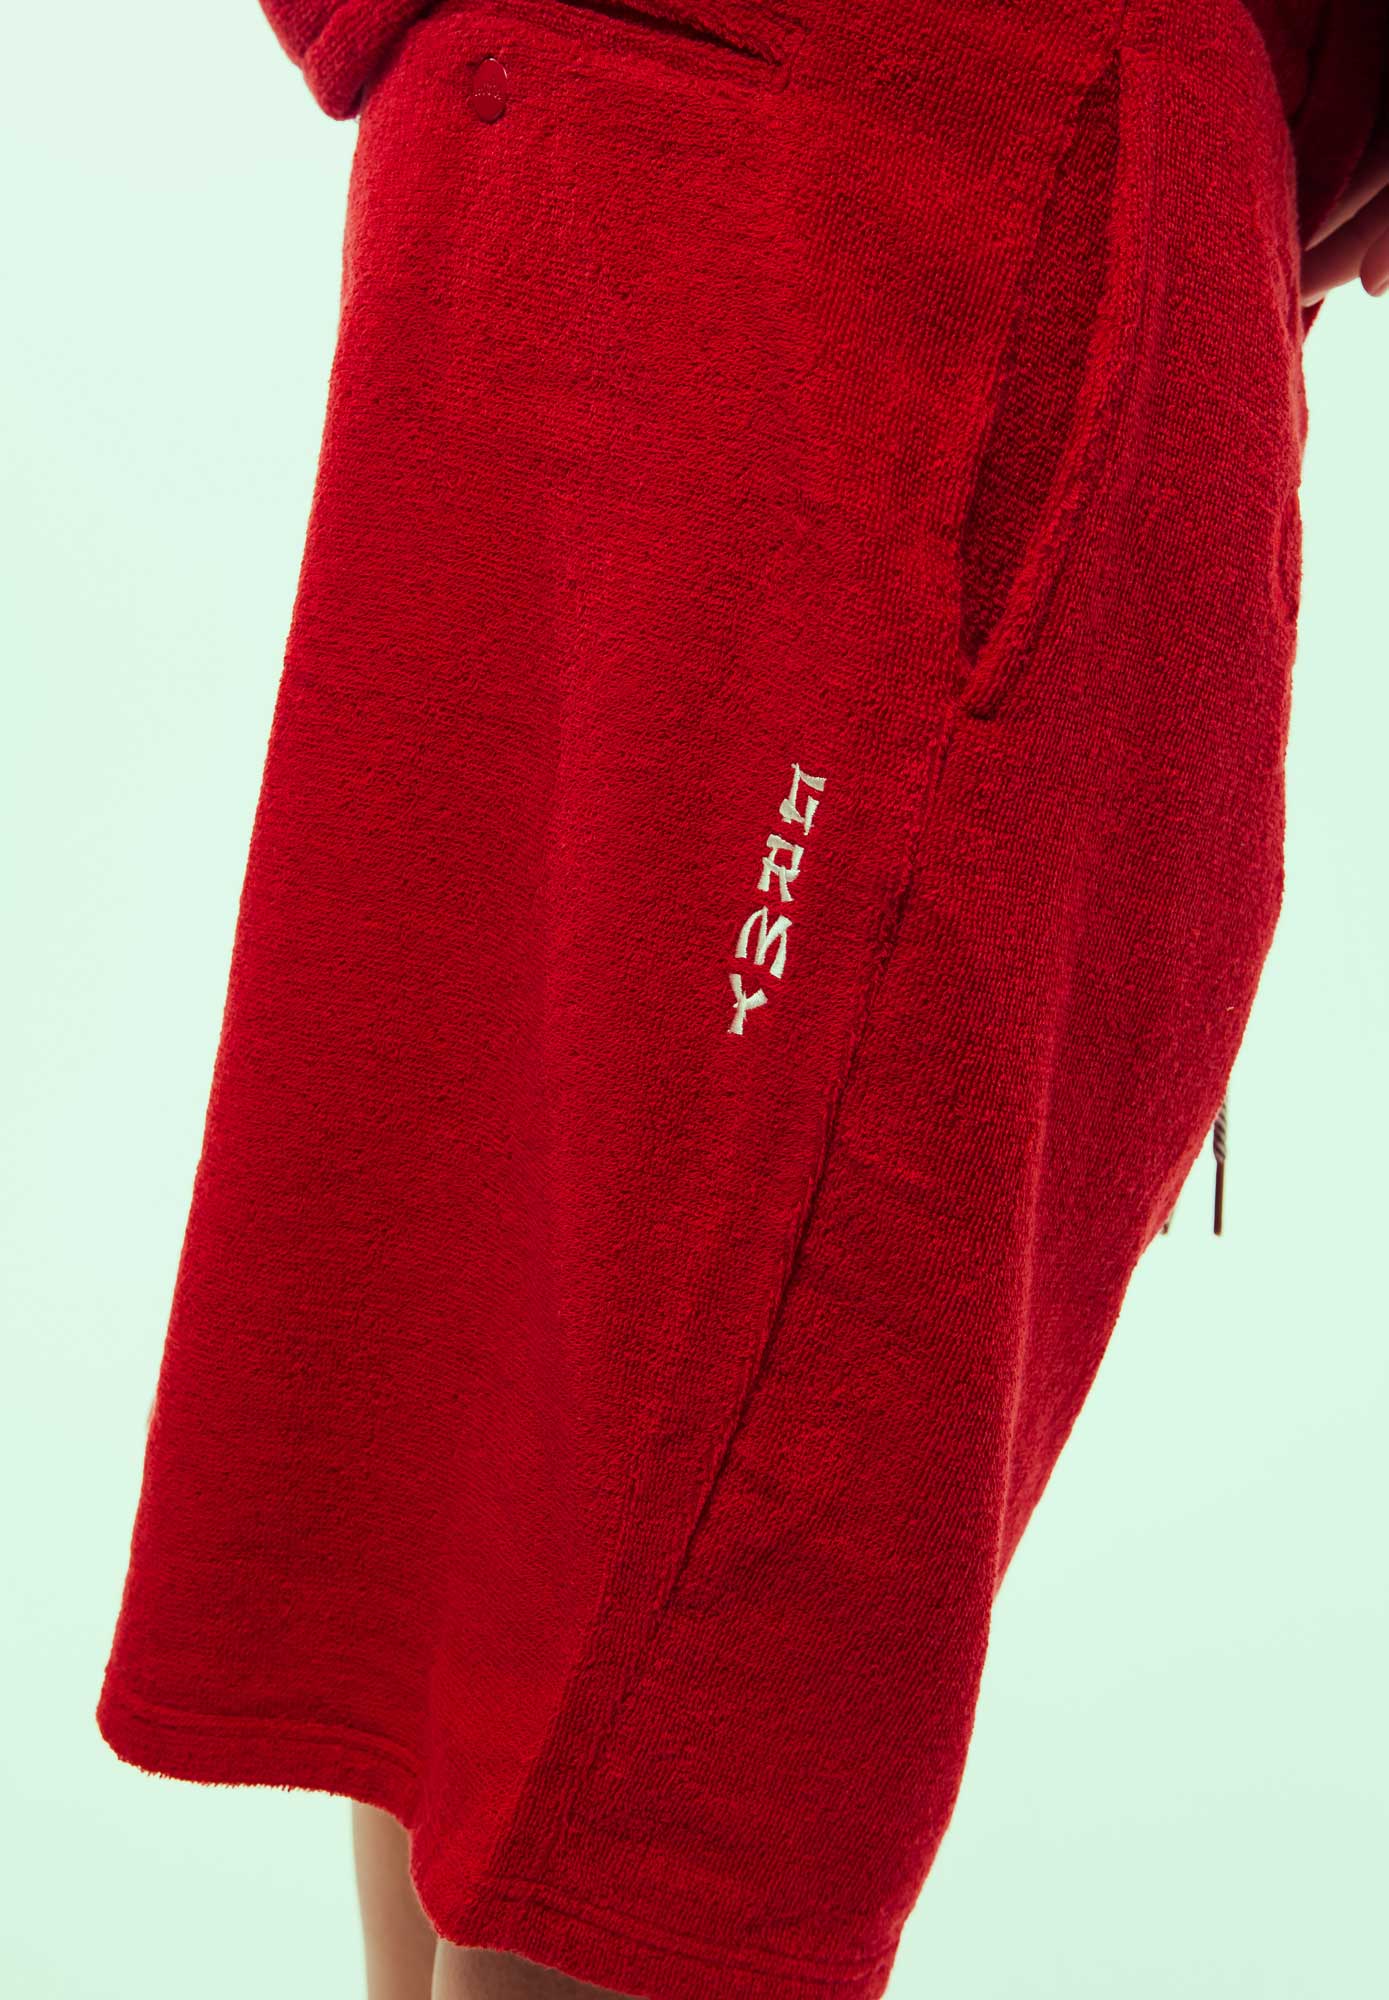 LUCKY DRAGON TERRY TOWELLING BAGGY SWEATSHORTS RED